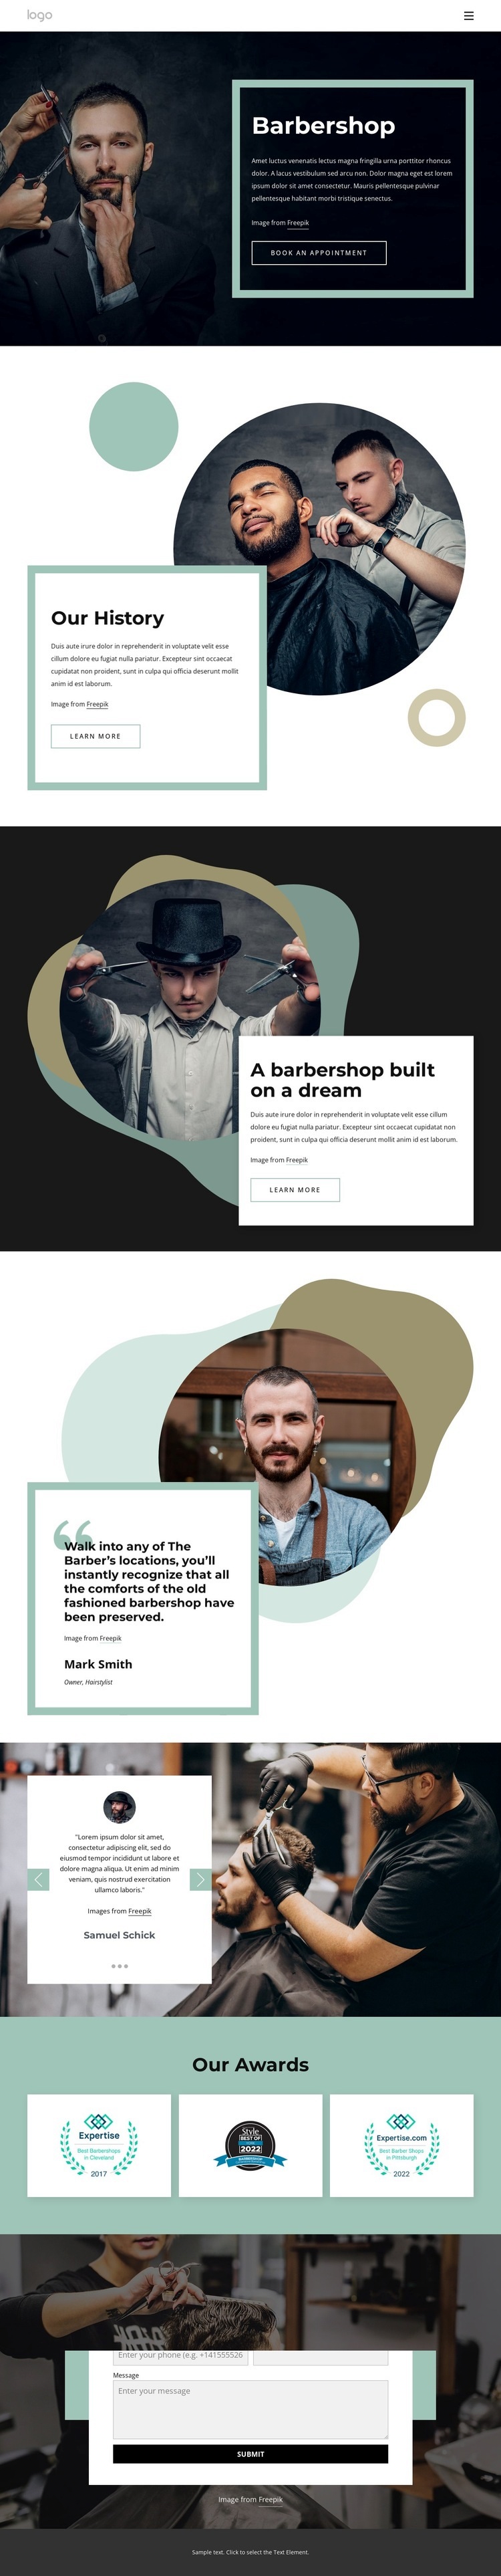 Barber shop through the ages Web Page Design